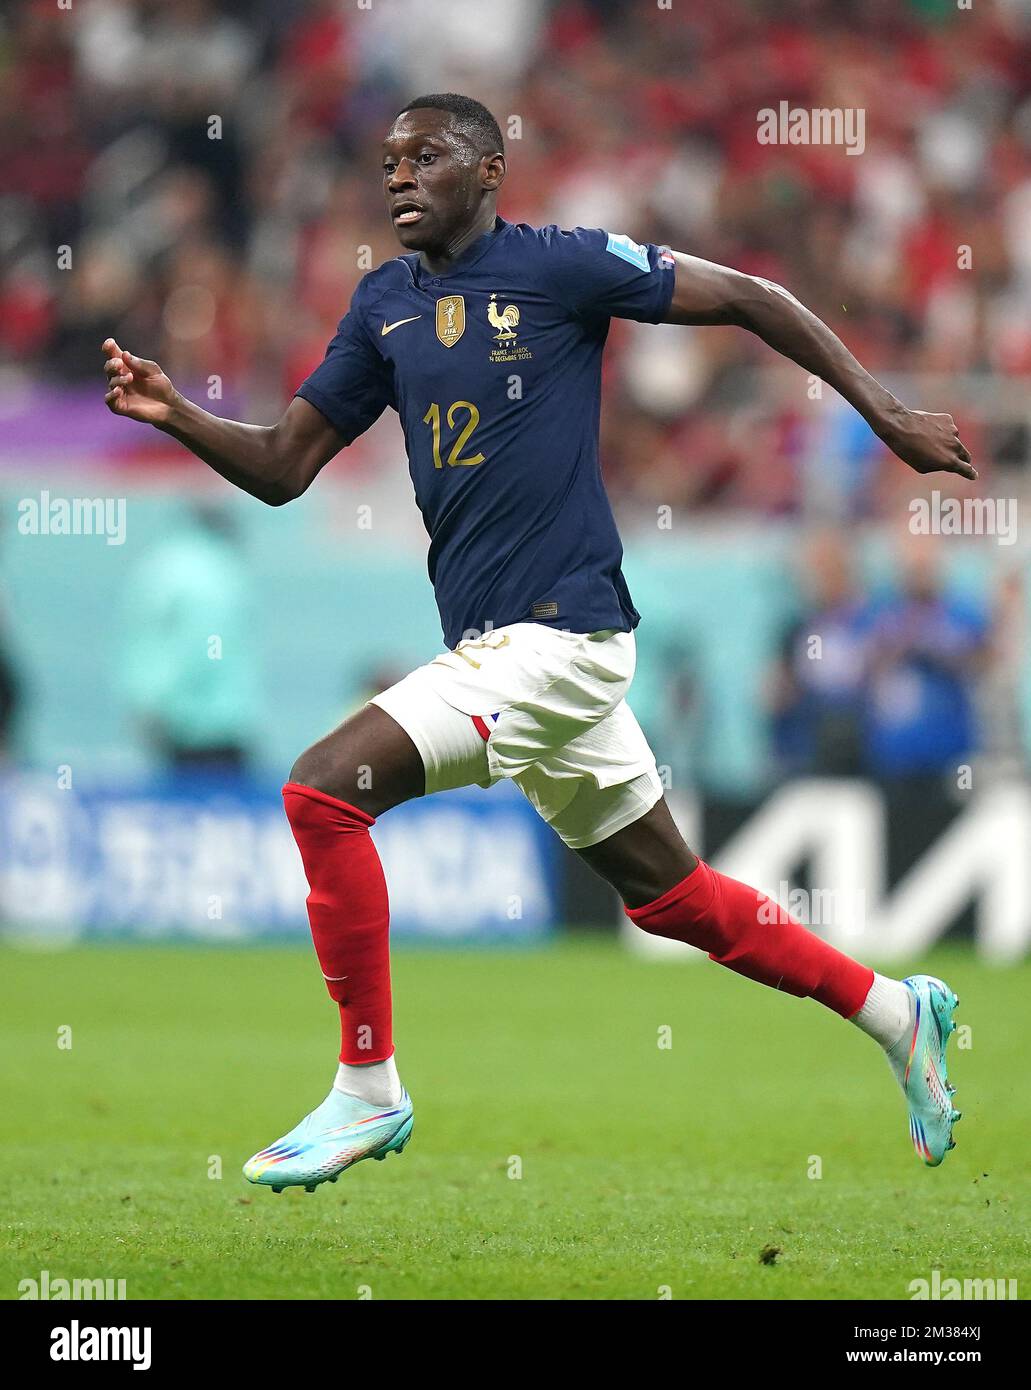 France's Randal Kolo Muani in action during the FIFA World Cup Semi-Final match at the Al Bayt Stadium in Al Khor, Qatar. Picture date: Wednesday December 14, 2022. Stock Photo